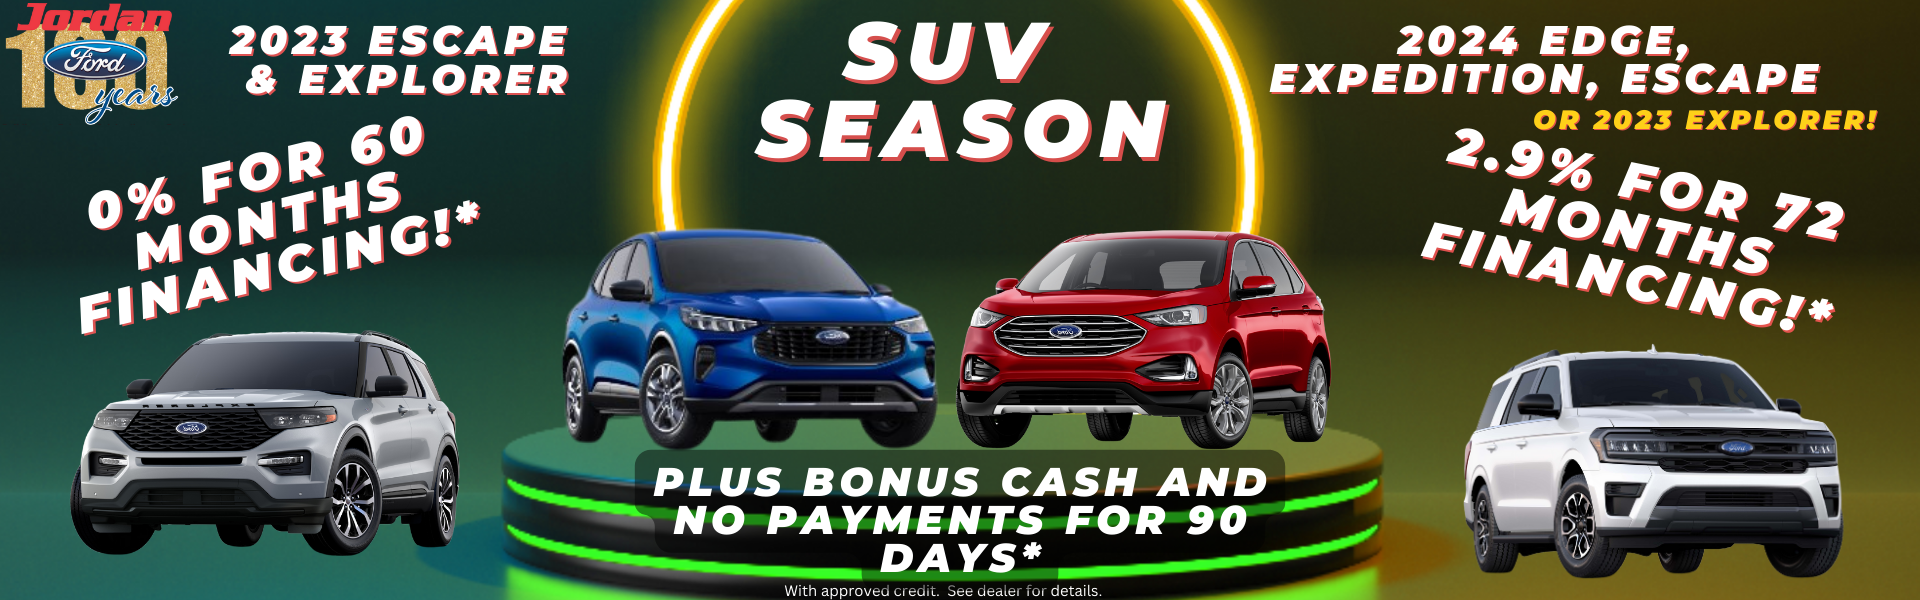 SUV APR offers available on Escape, Explorer, Expedition